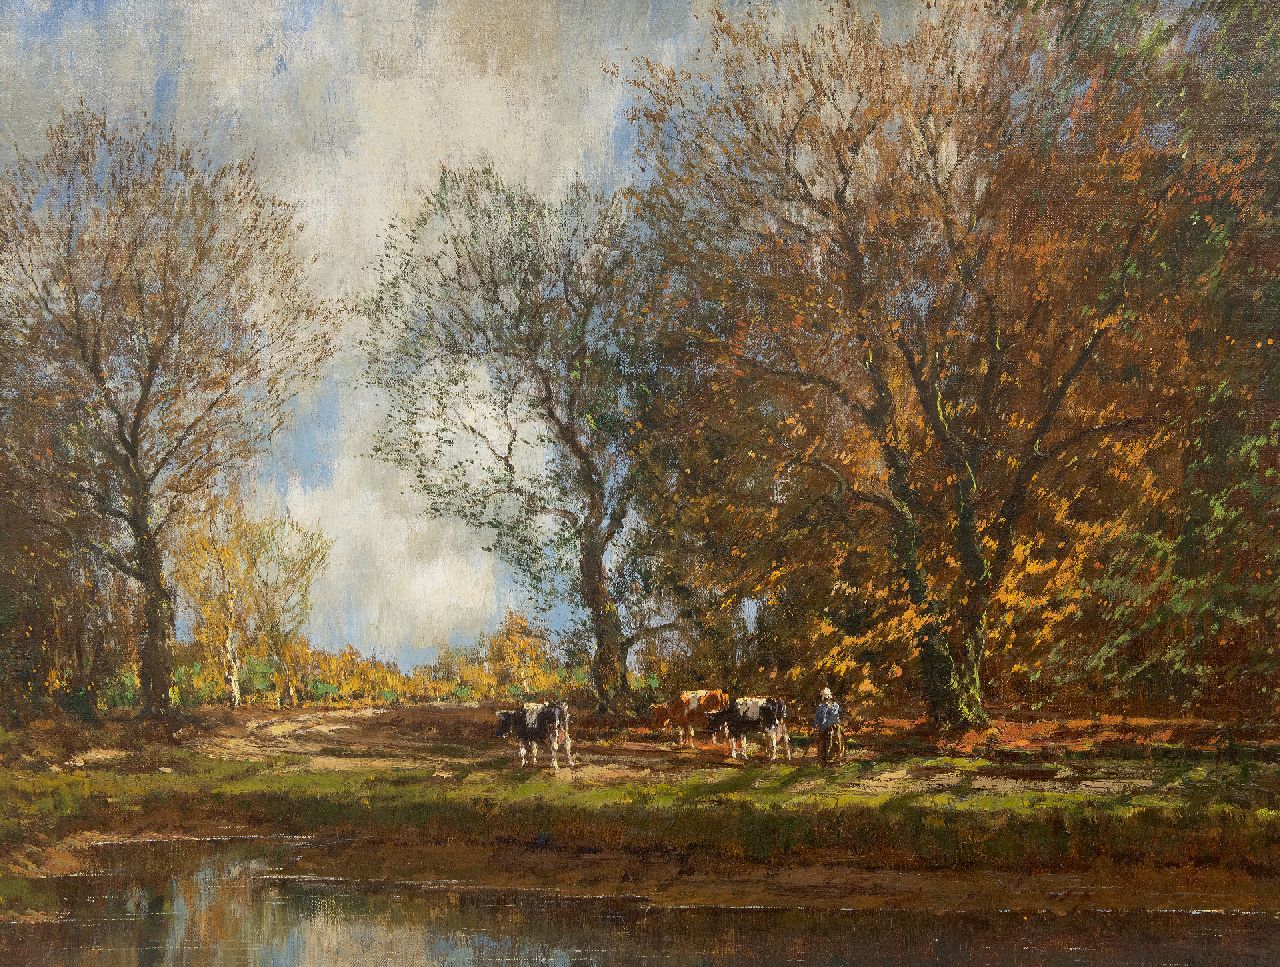 Gorter A.M.  | 'Arnold' Marc Gorter | Paintings offered for sale | Cows along the Vordense Beek, oil on canvas 58.4 x 76.3 cm, signed l.r.